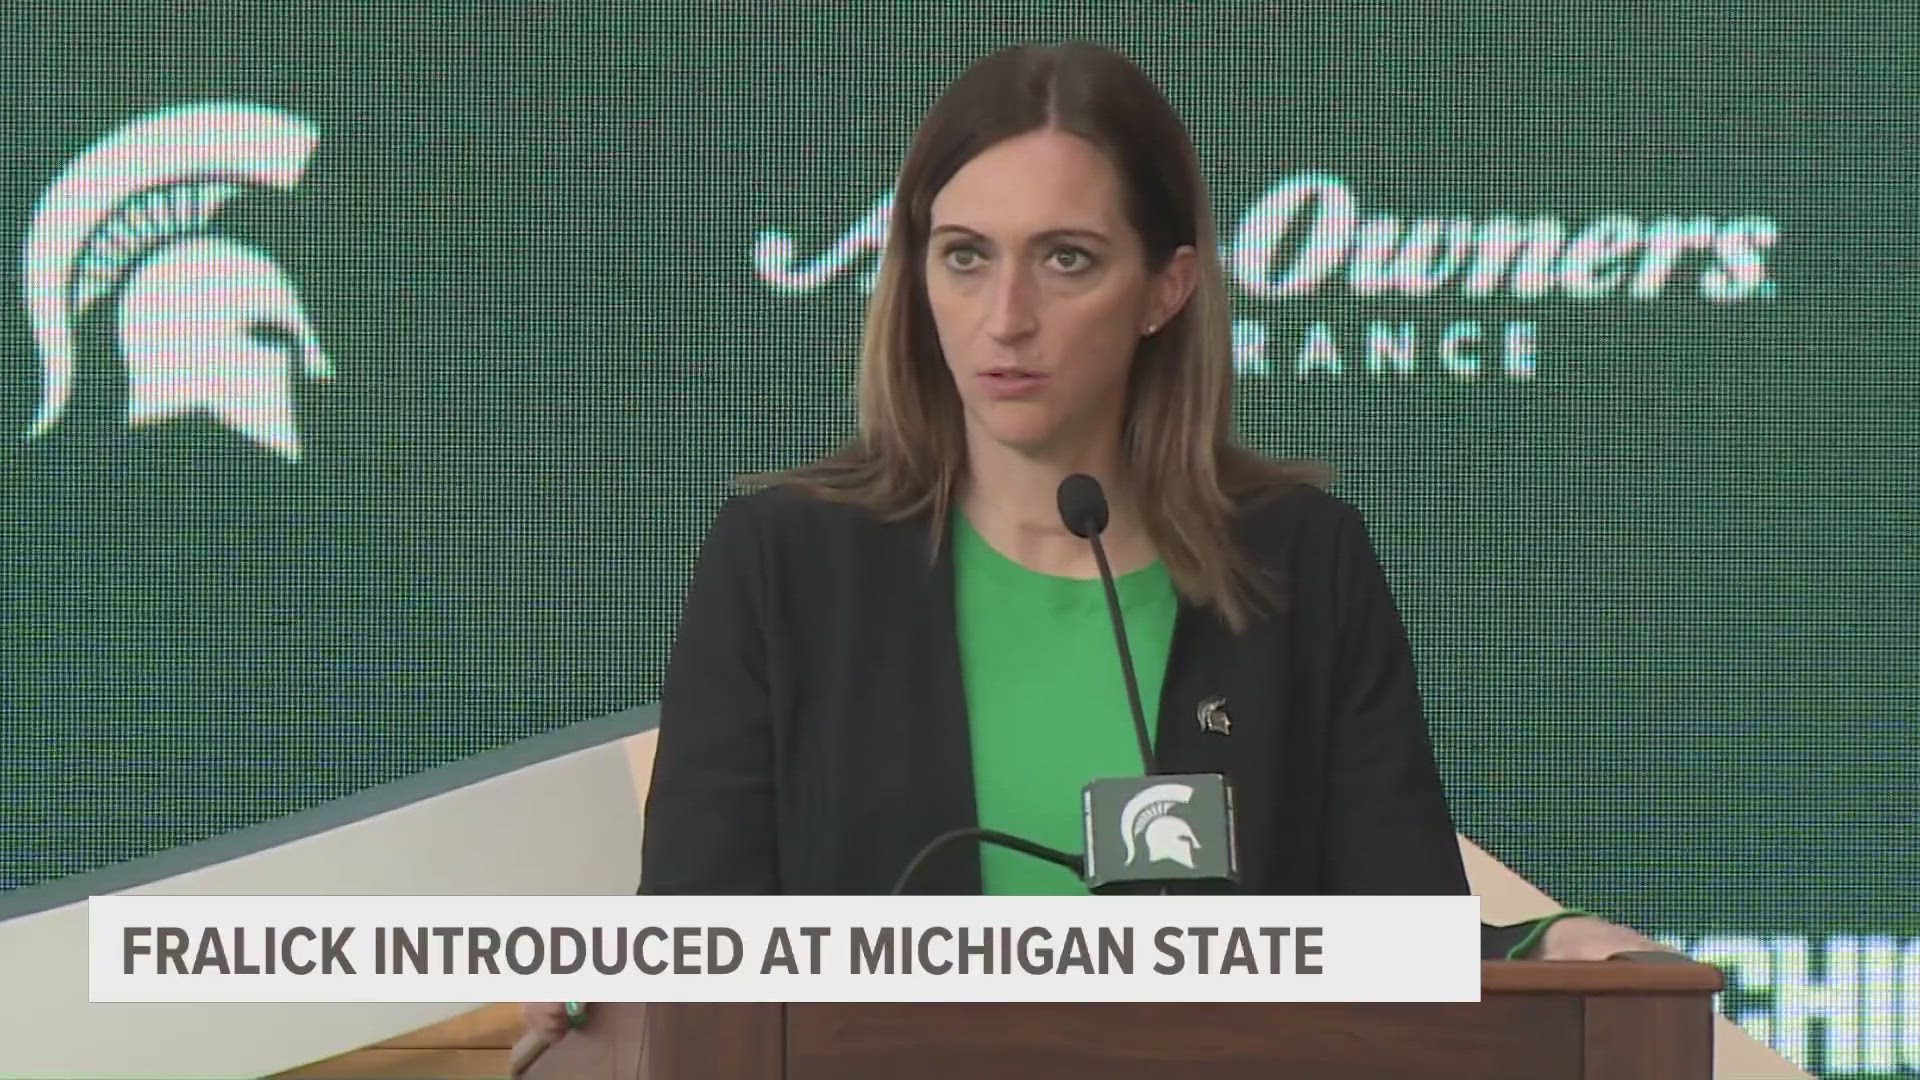 For 16 years, Suzy Merchant was the face of the Michigan State women's basketball program. Now, there is a new leader of the Spartans.